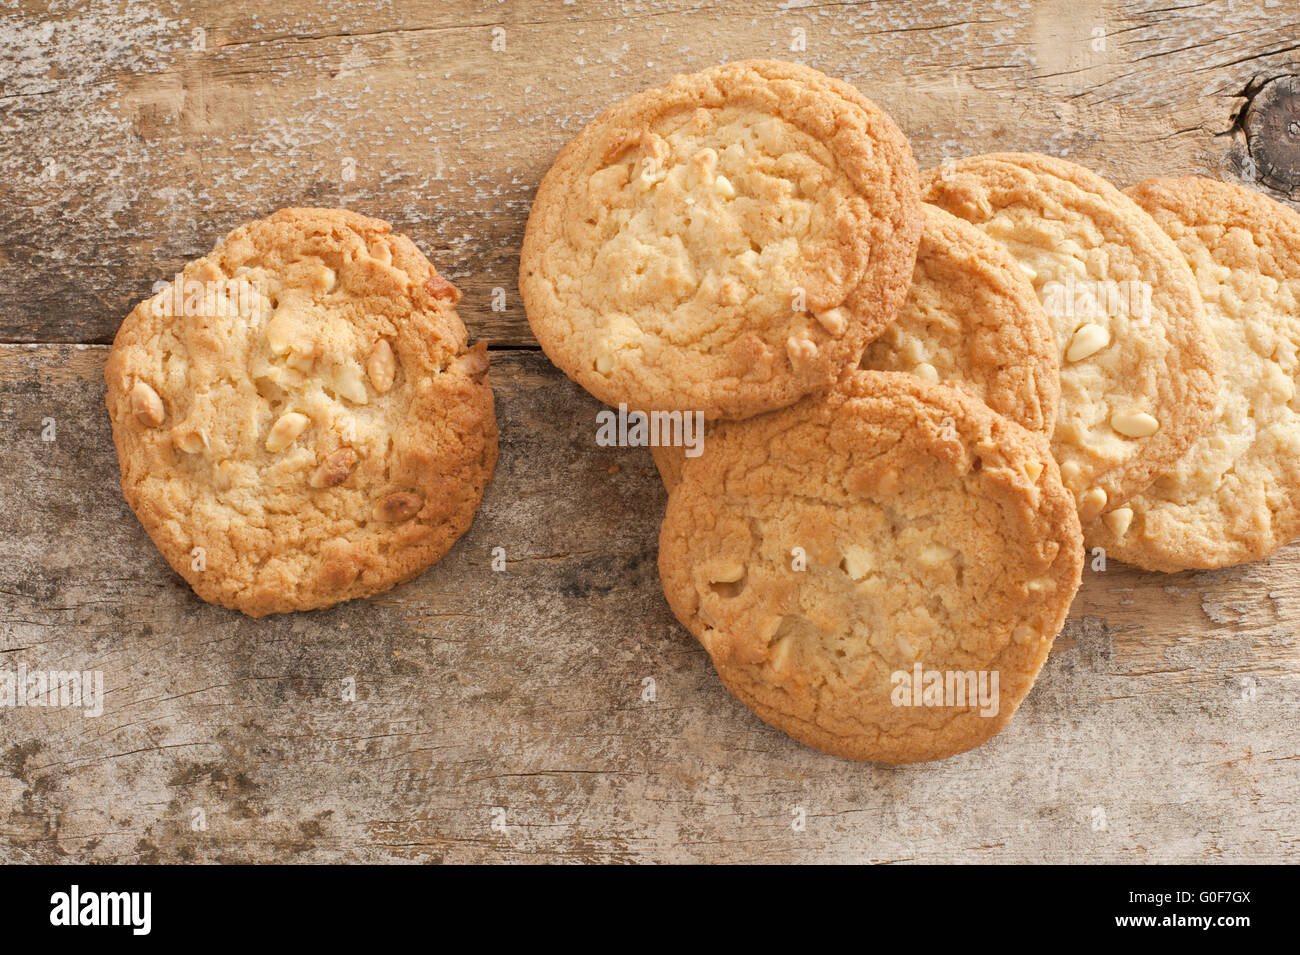 Fresh Baked Cookies on Rustic Wooden Table Stock Photo